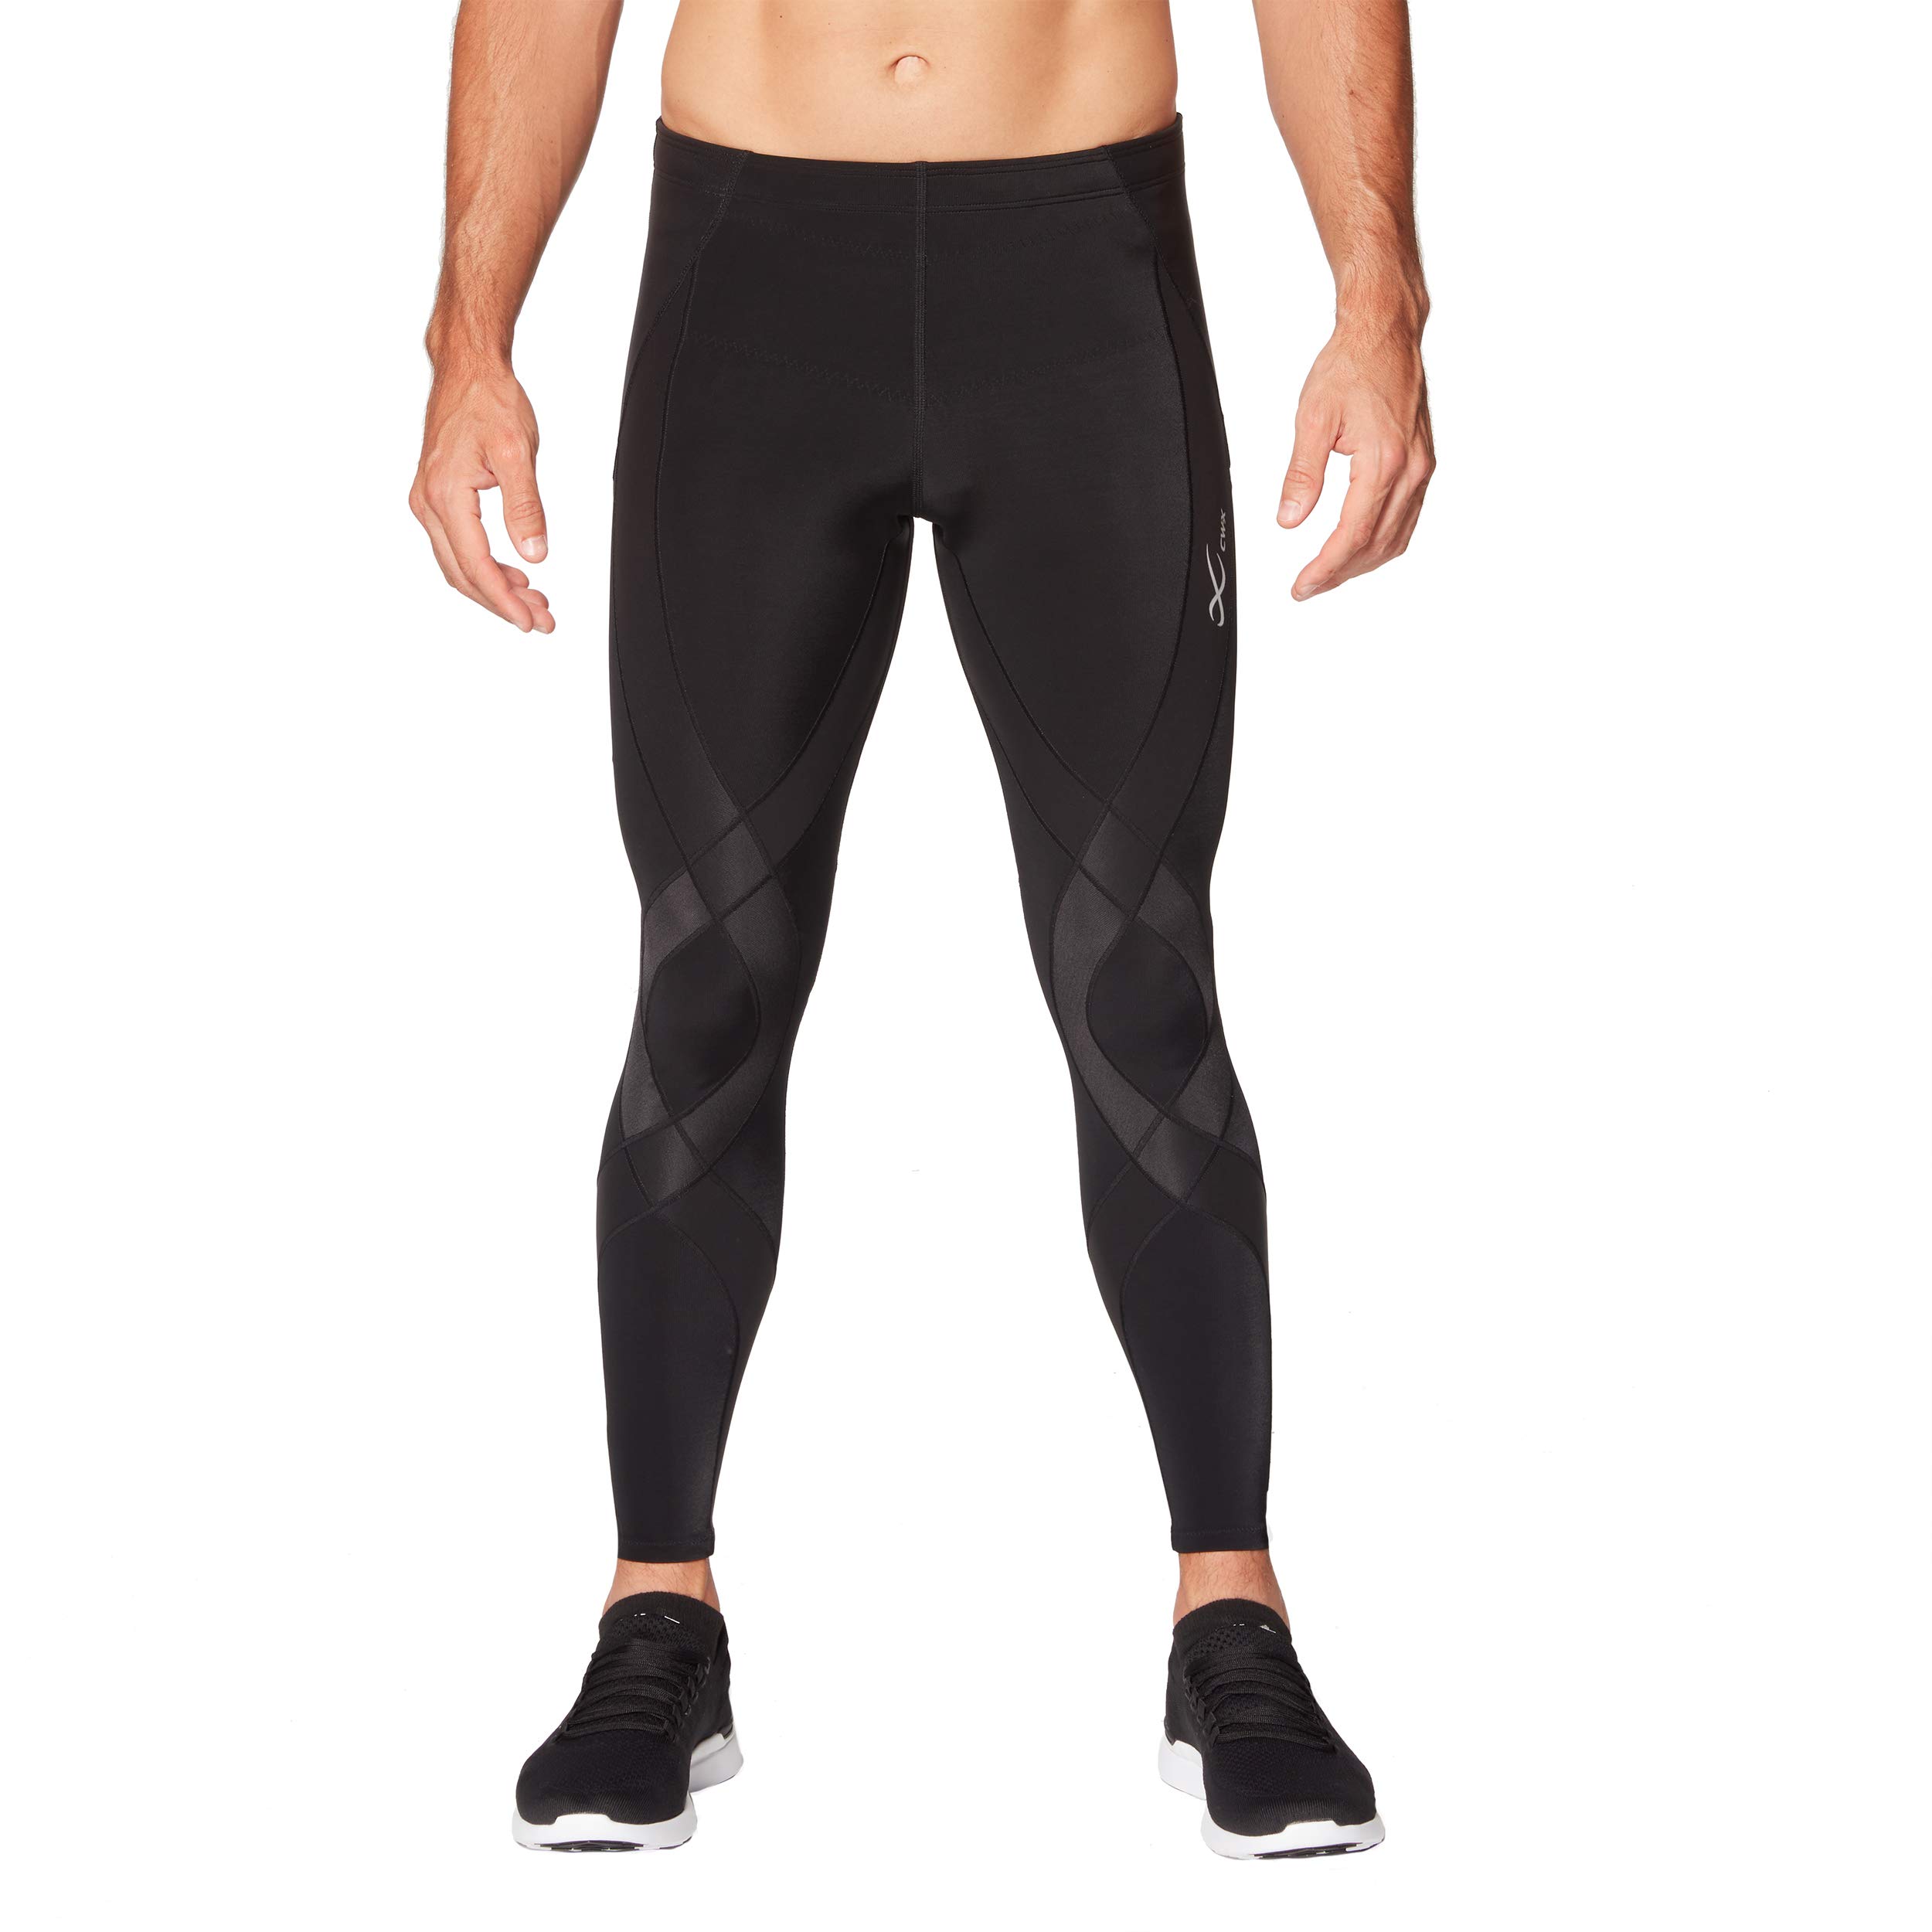 CW-X Men's Endurance Generator Joint and Muscle Support Compression Tight